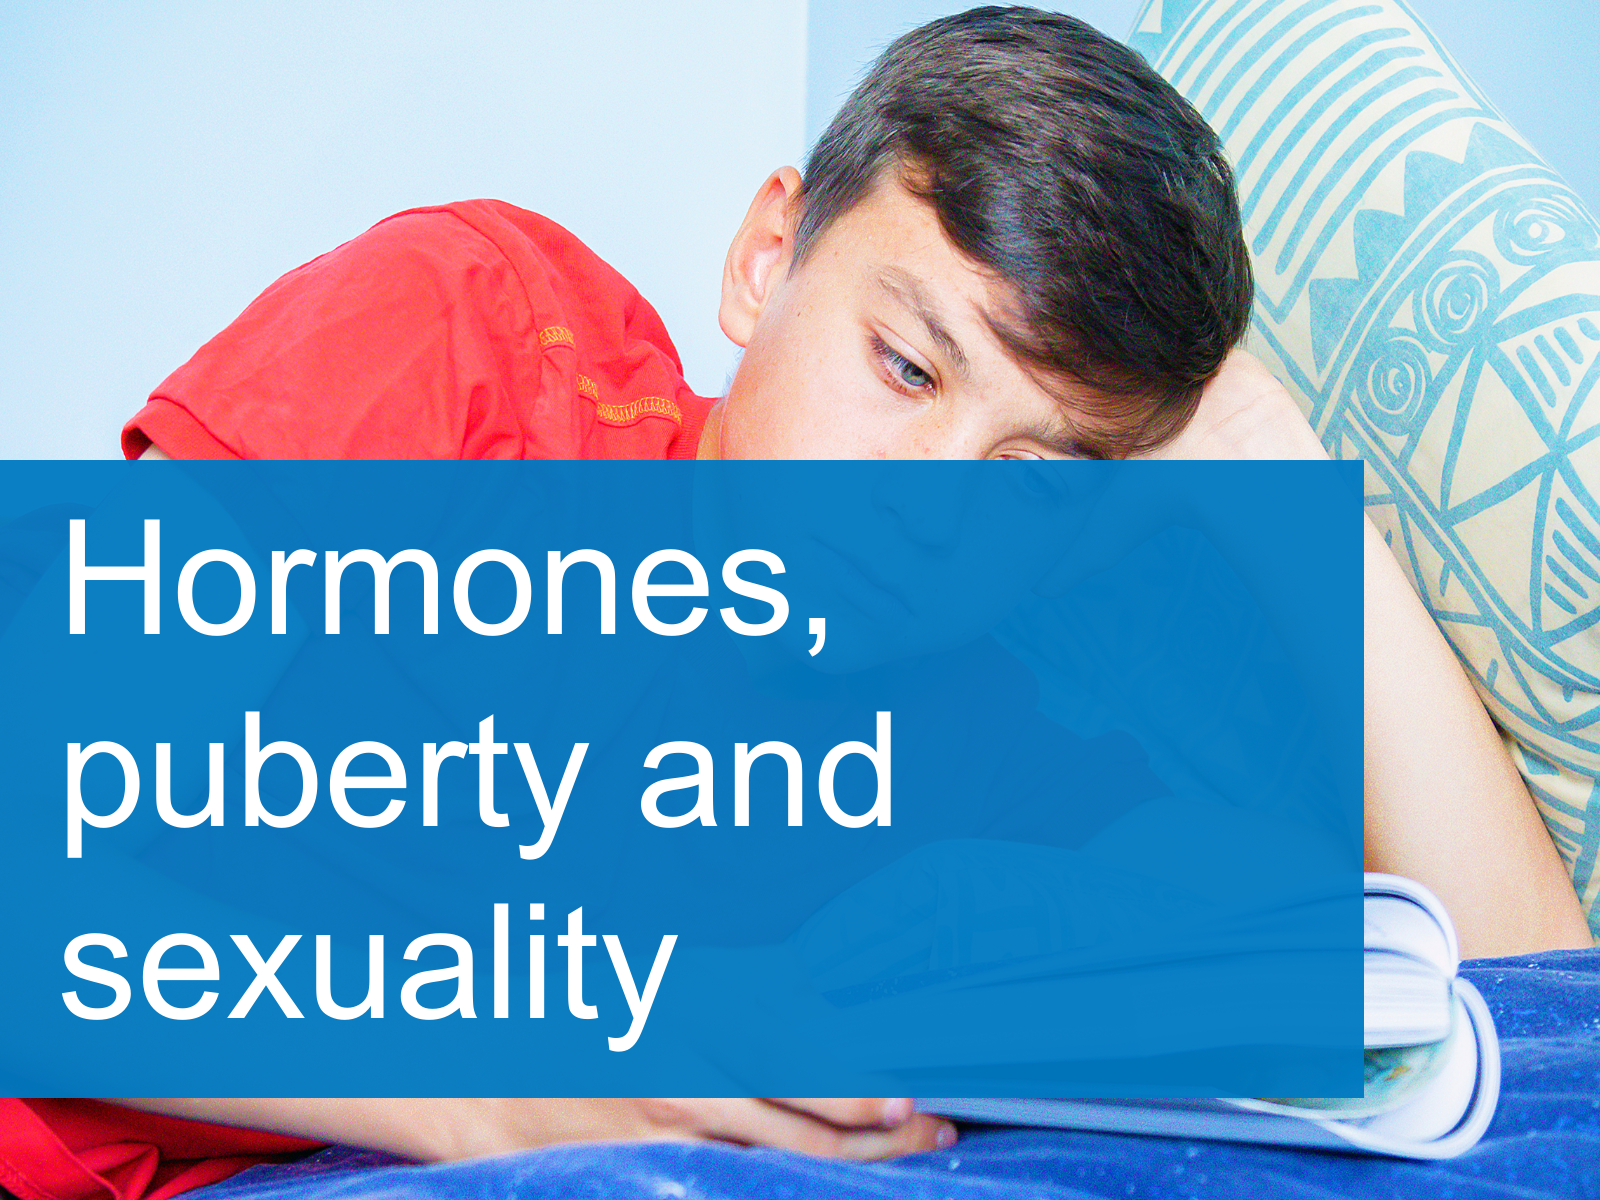 Hormones, puberty and sexuality